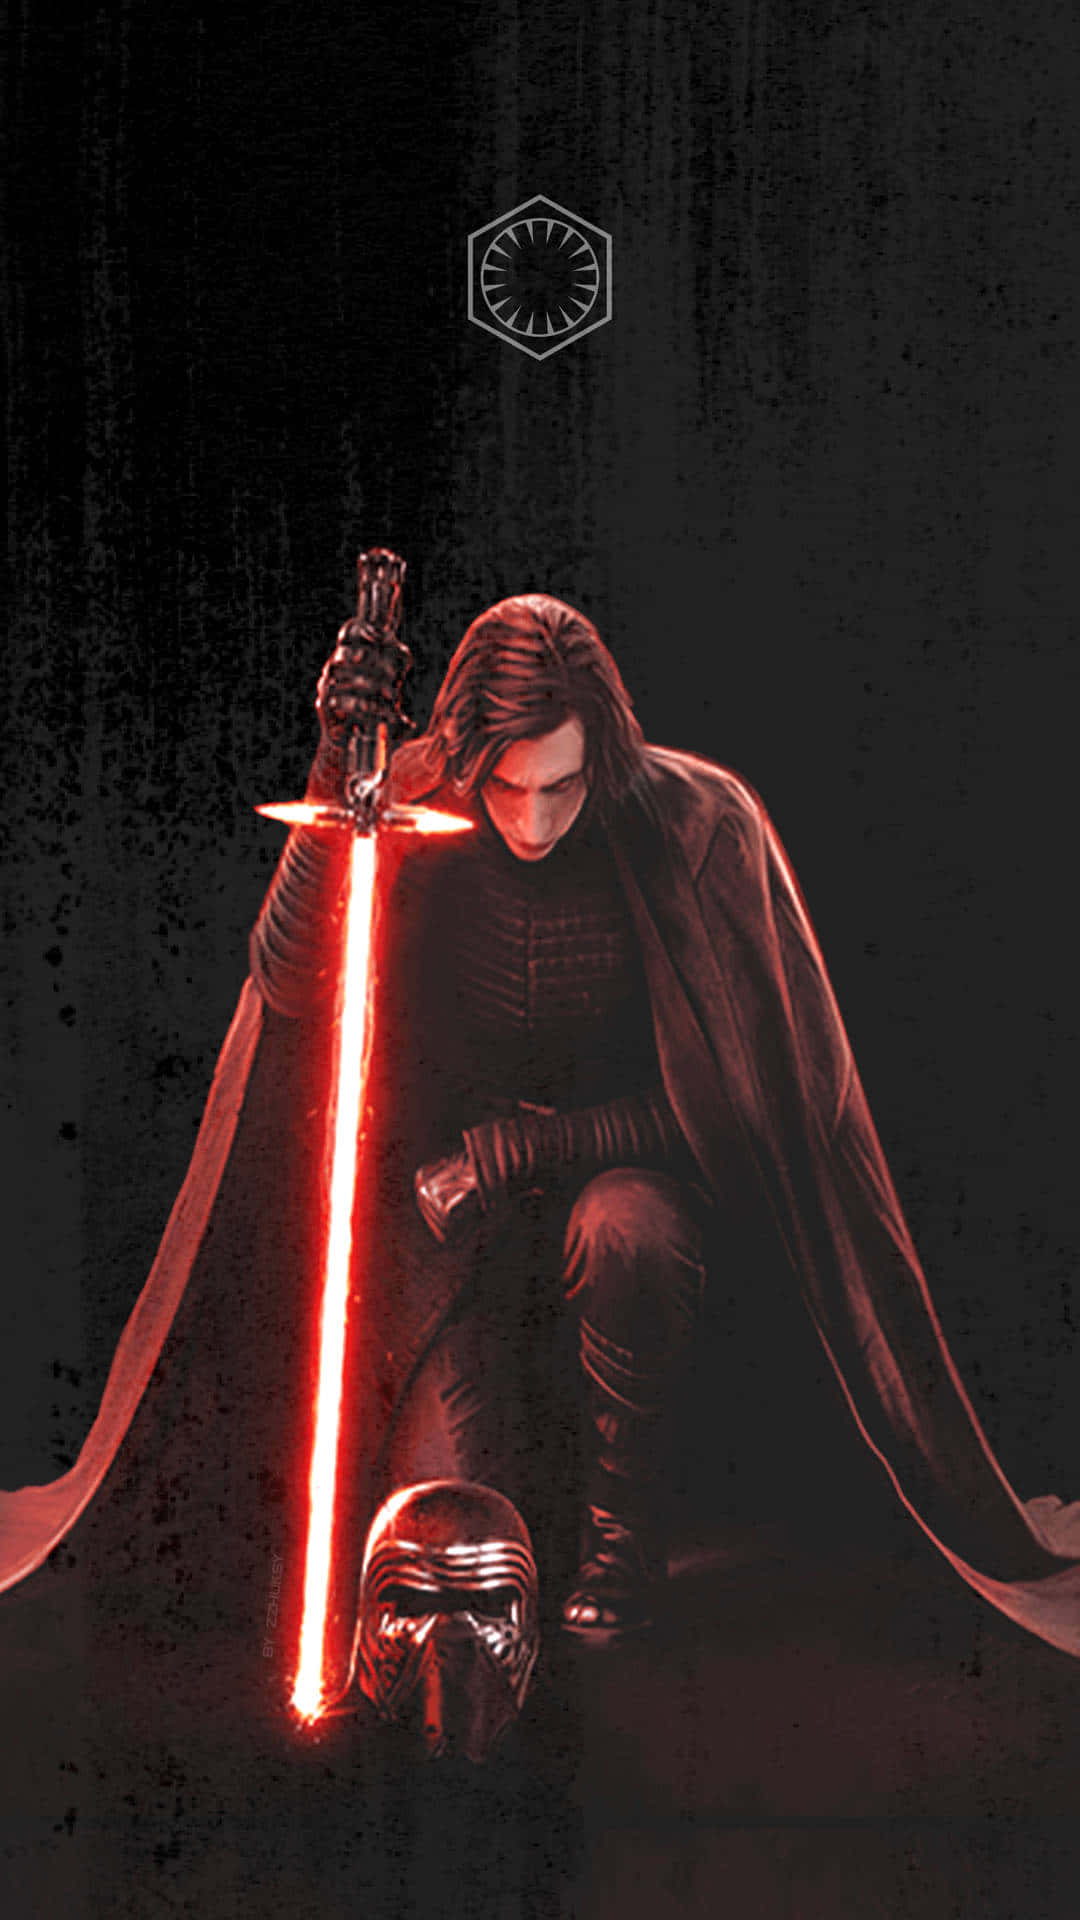 "Join me, and together, we will rule the galaxy" - Kylo Ren. Wallpaper